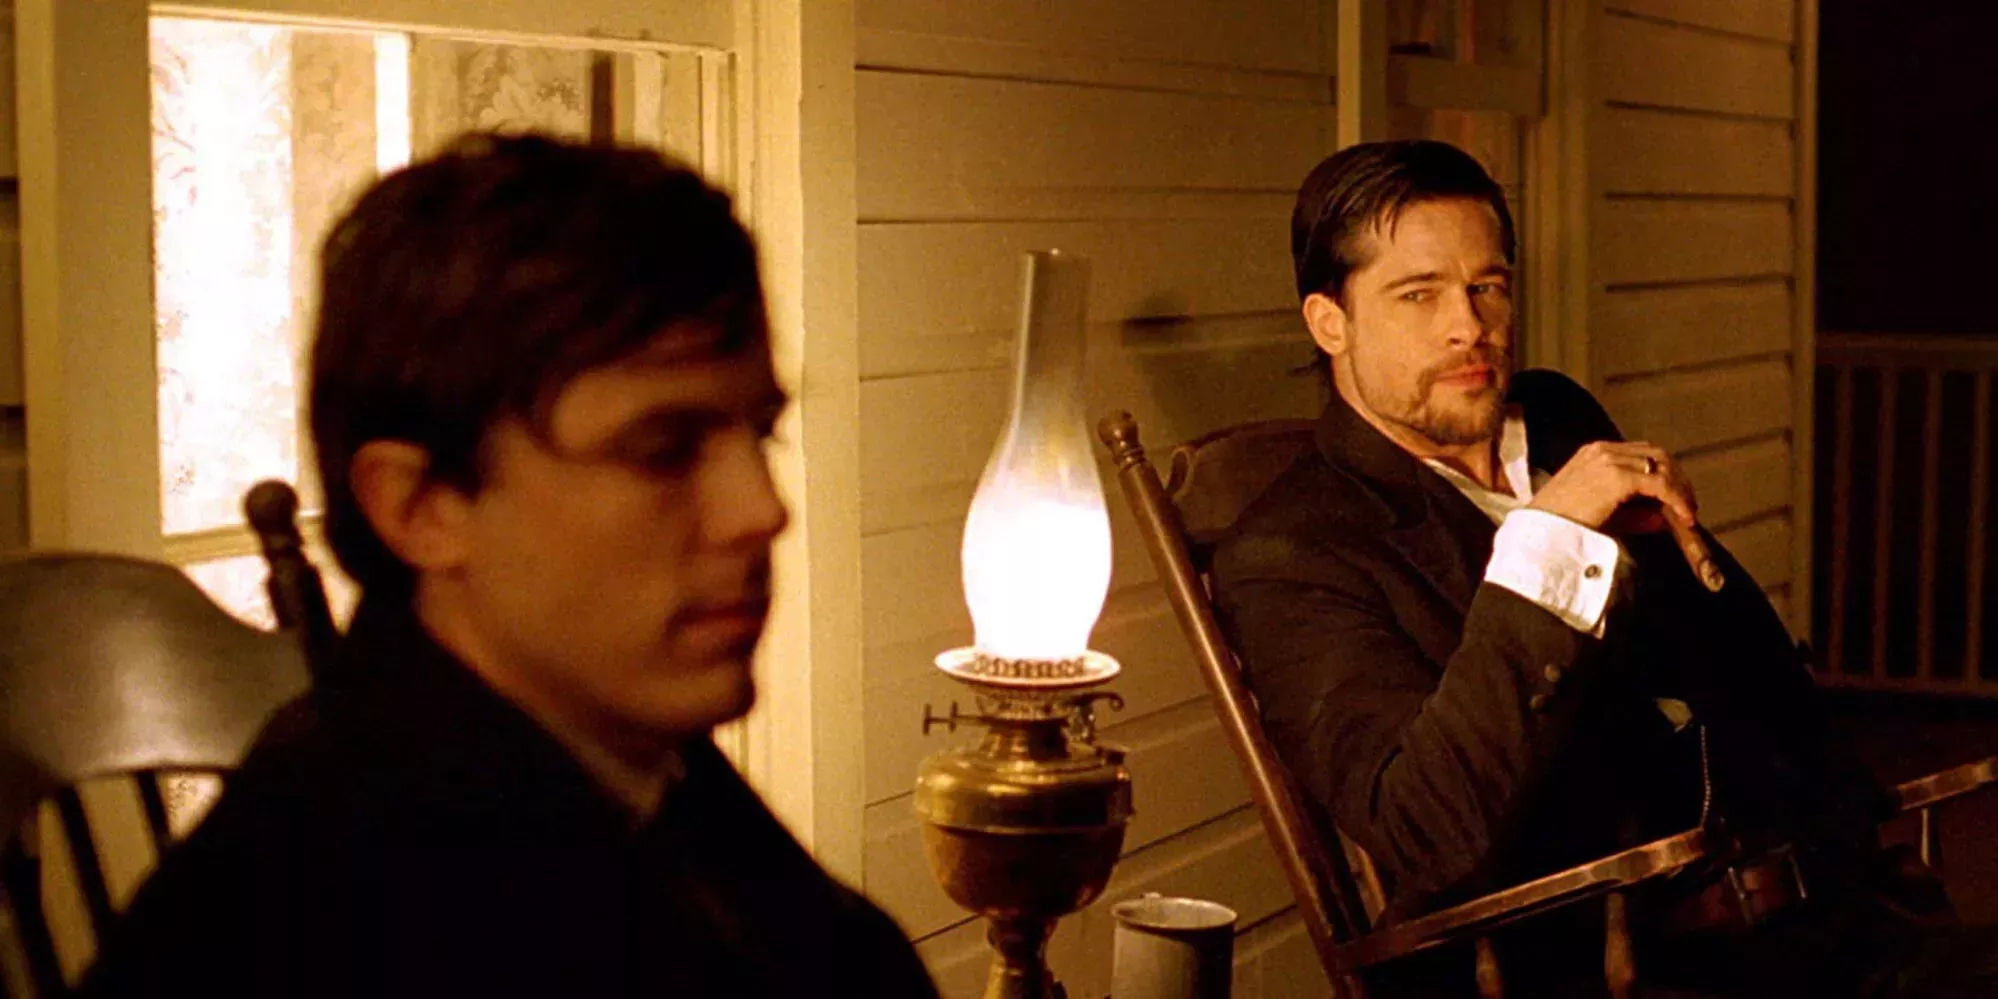 Brad Pitt sits on the porch near Casey Affleck in The Assassination Of Jesse James